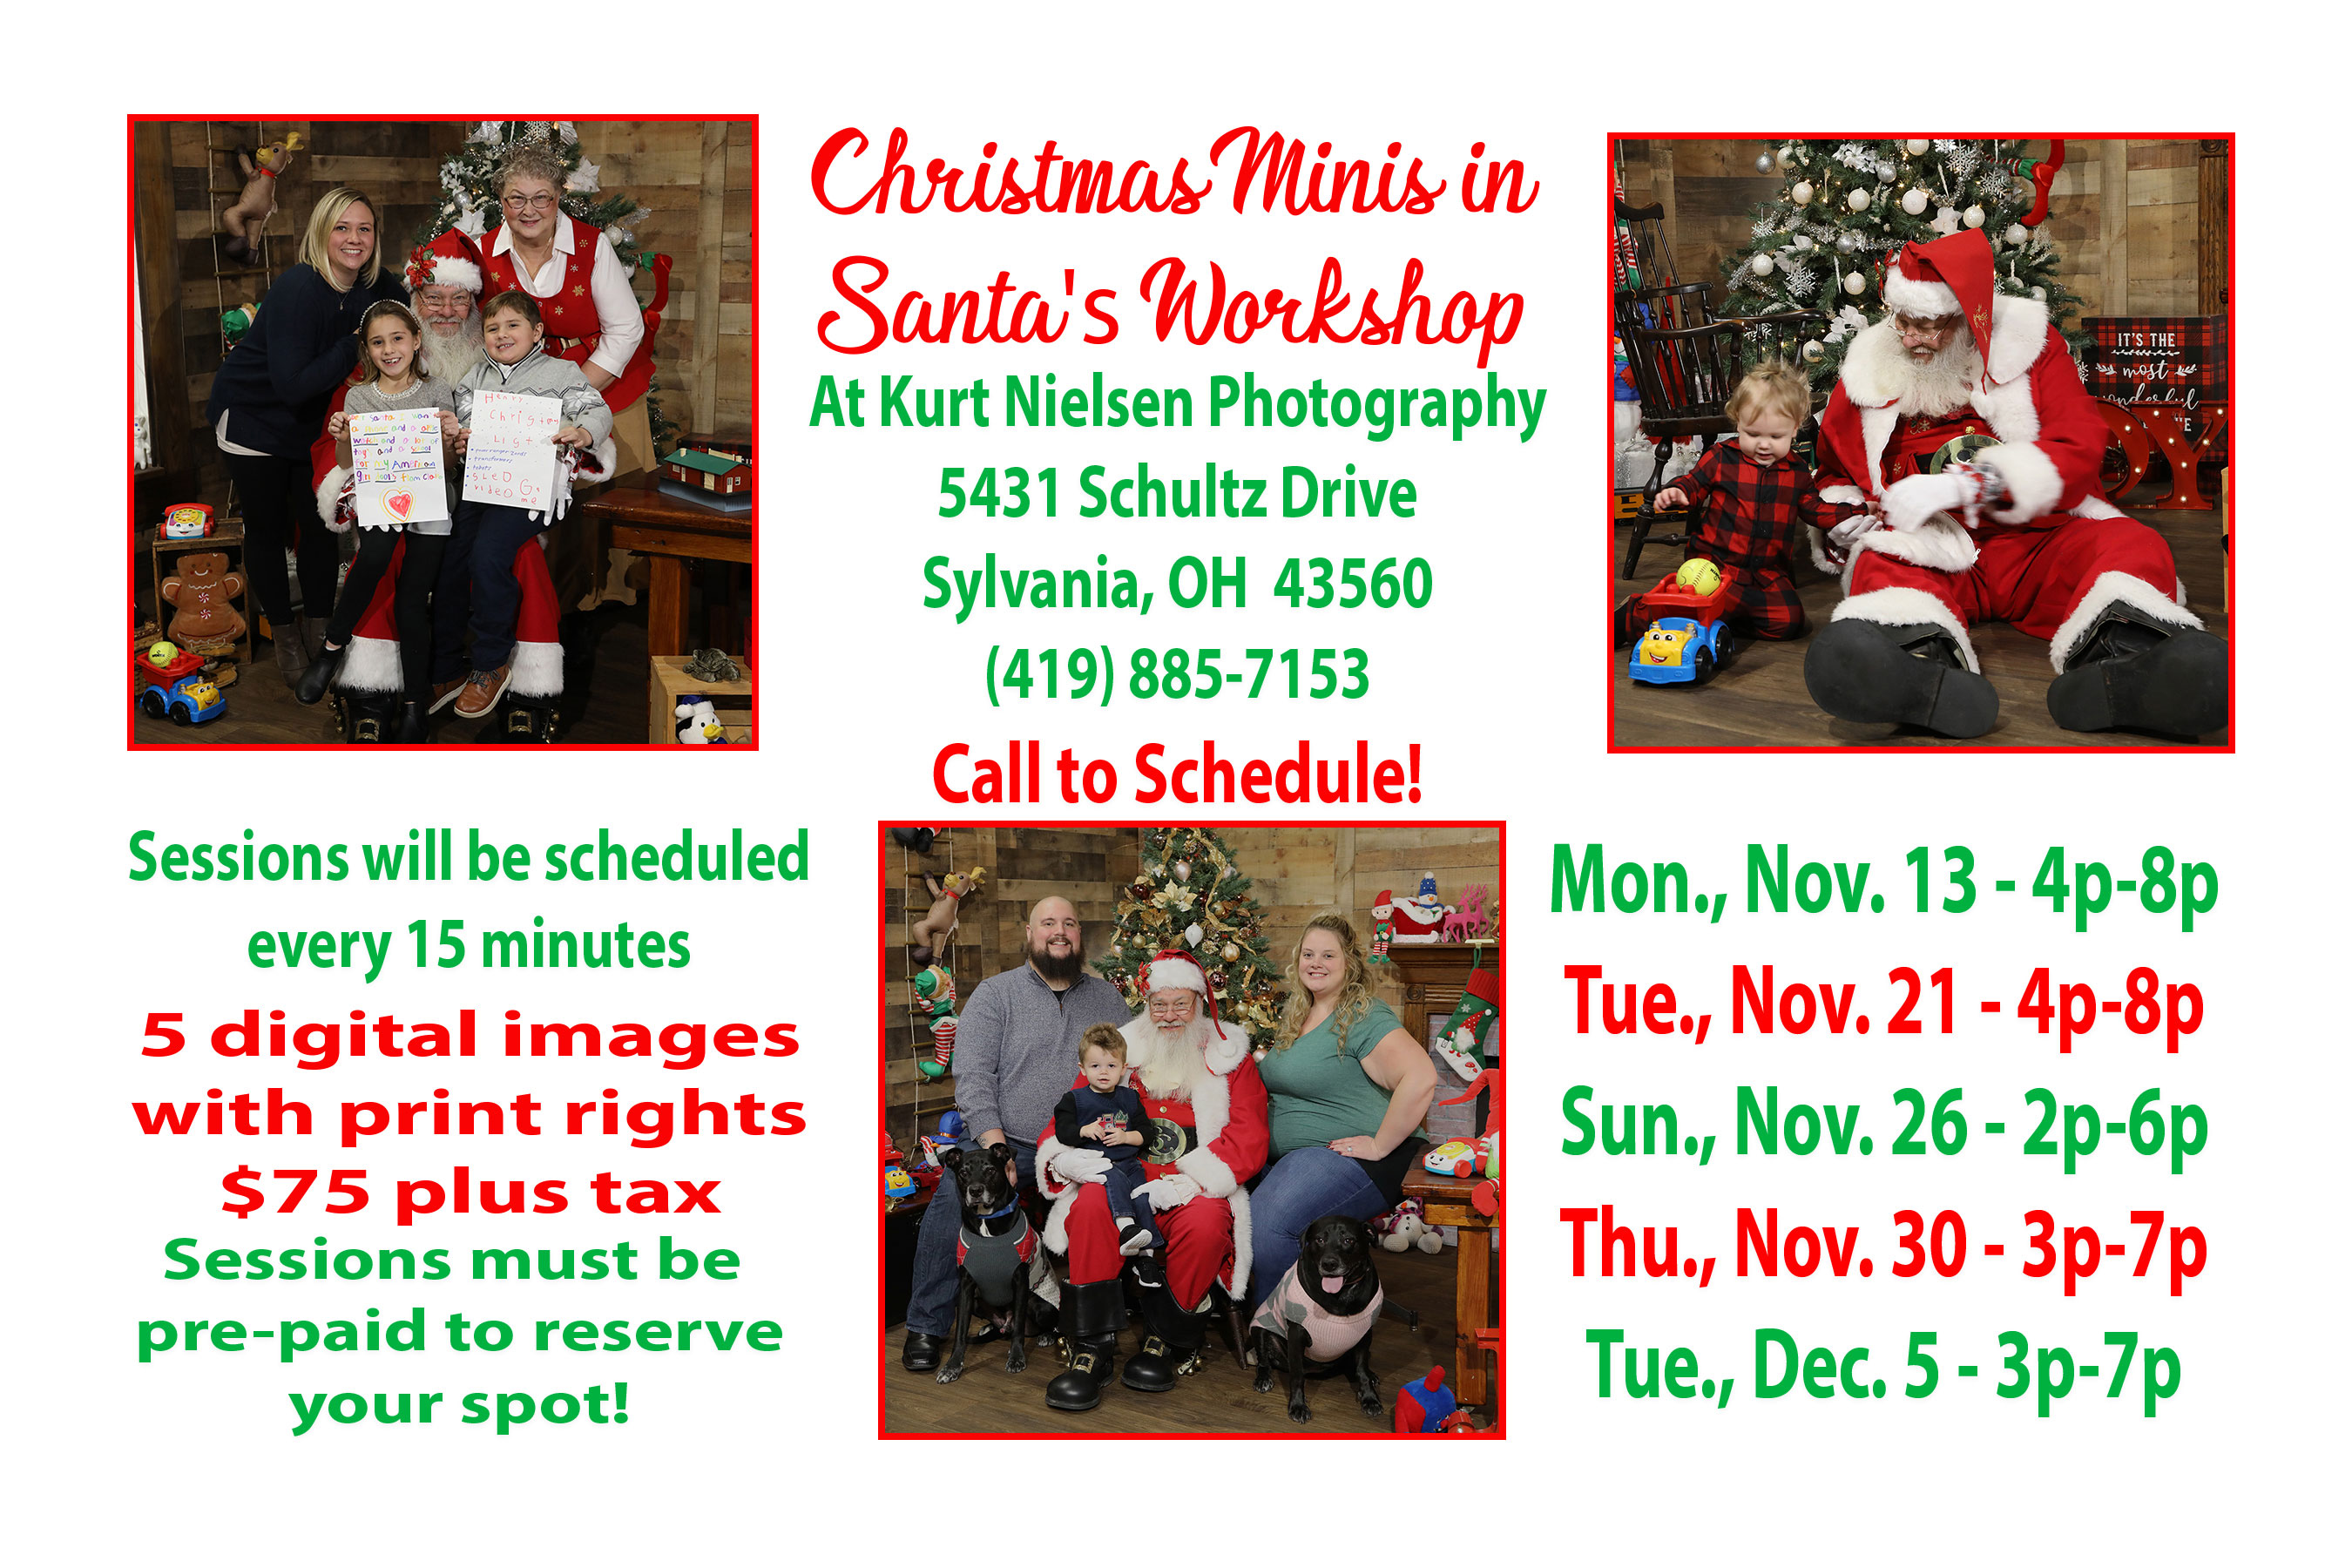 Christmas Mini Portrait Sessions with Santa that are Perfect for your Christmas Cards